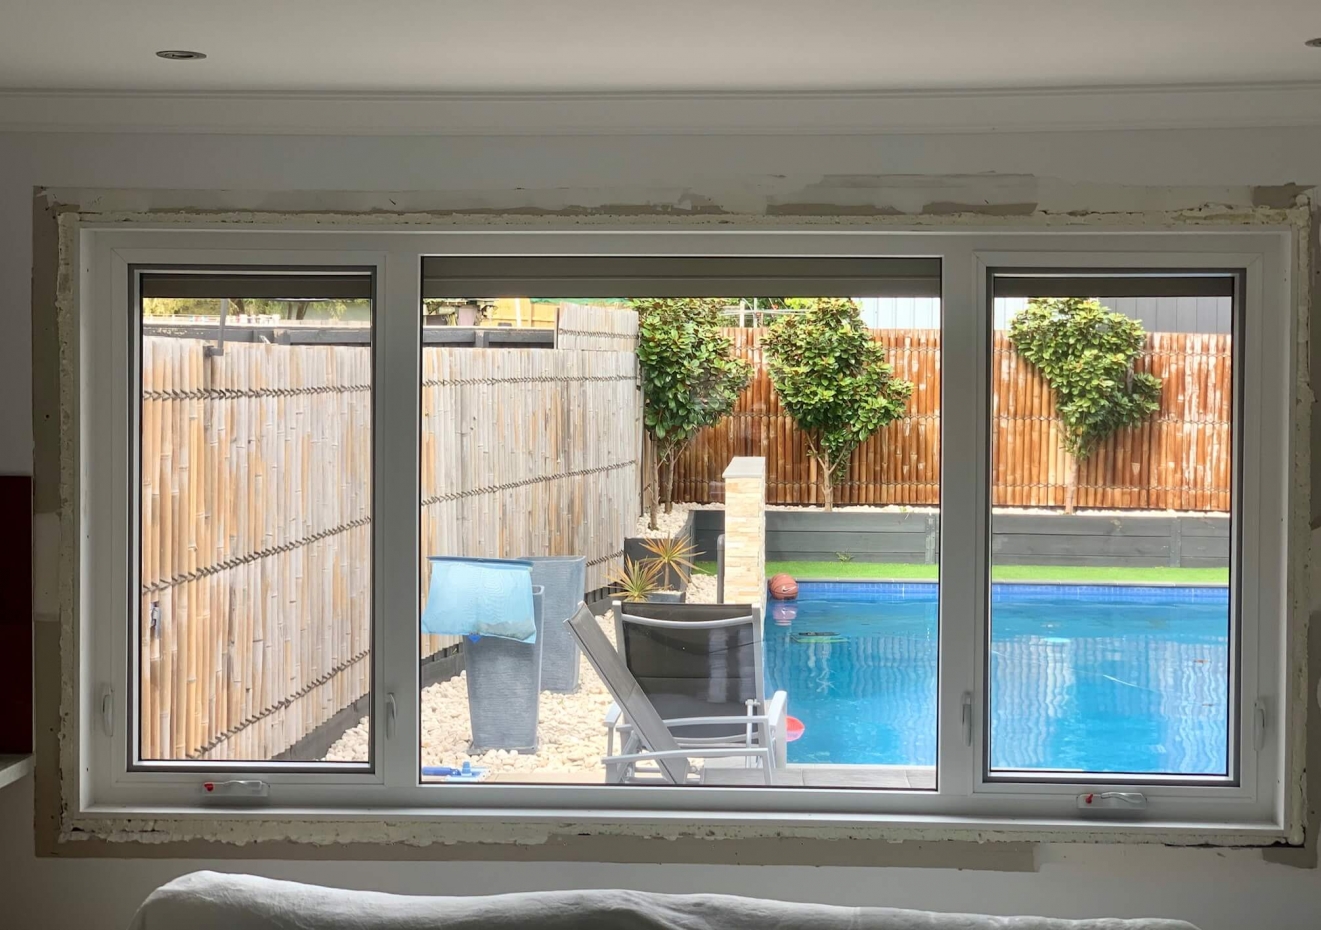 Double Glazed UPVC - At Astellite, we supply the finest quality double glazed German windows and doors, manufactured to suit Australian conditions and surpass industry quality standards.